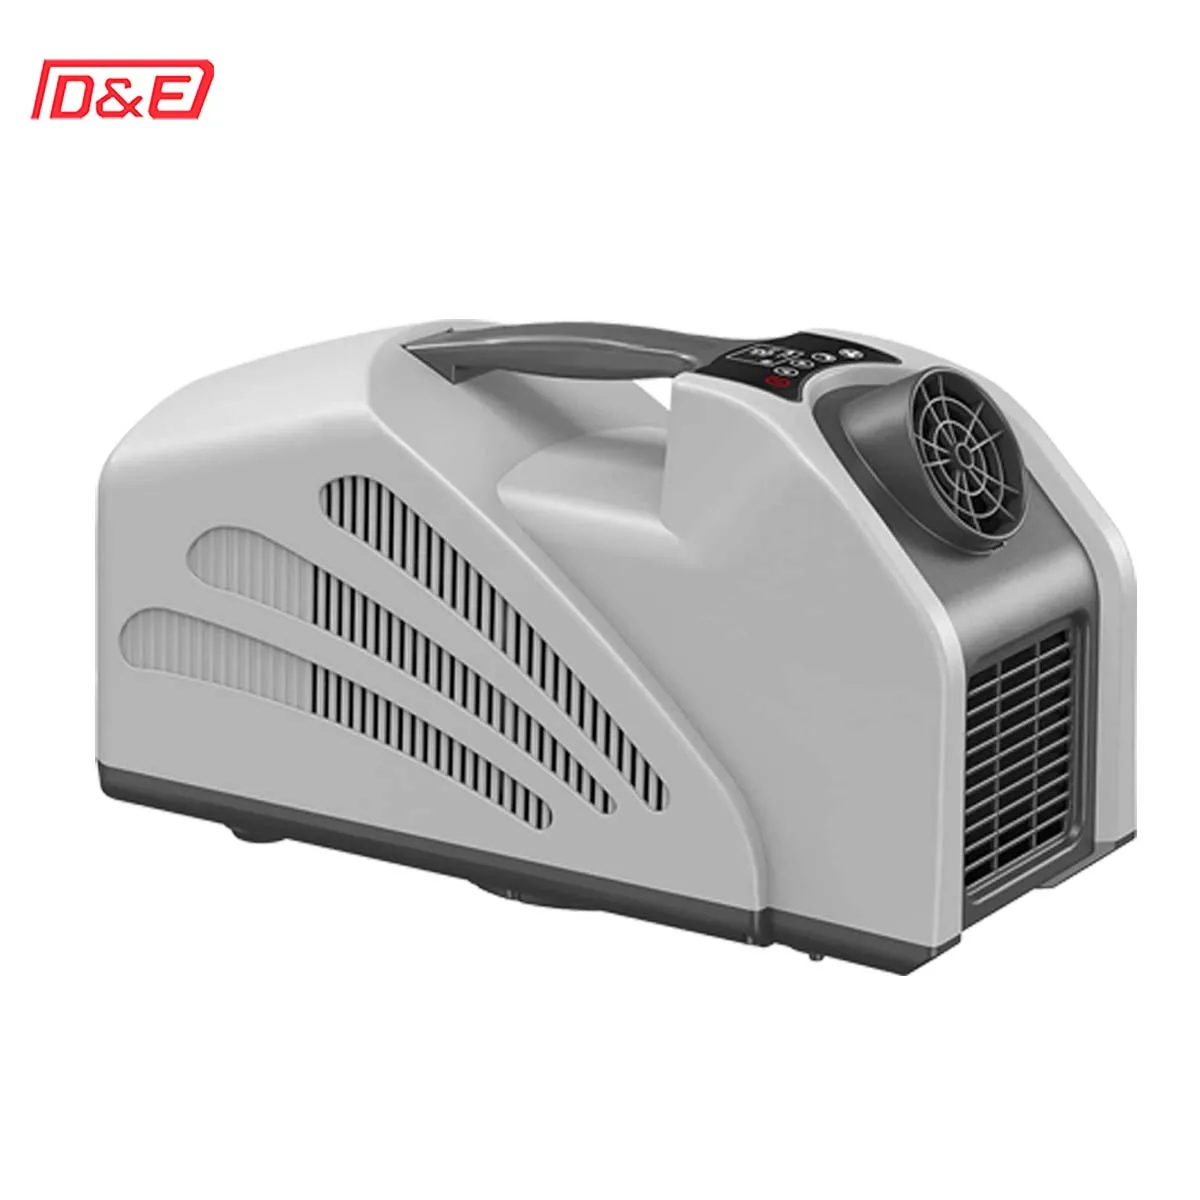 

Portable Air Conditioner Mobile Mini AC 24V 100-240V Fast Cooling Electric for Car Truck RV Bout Camper Tent Indoor Home